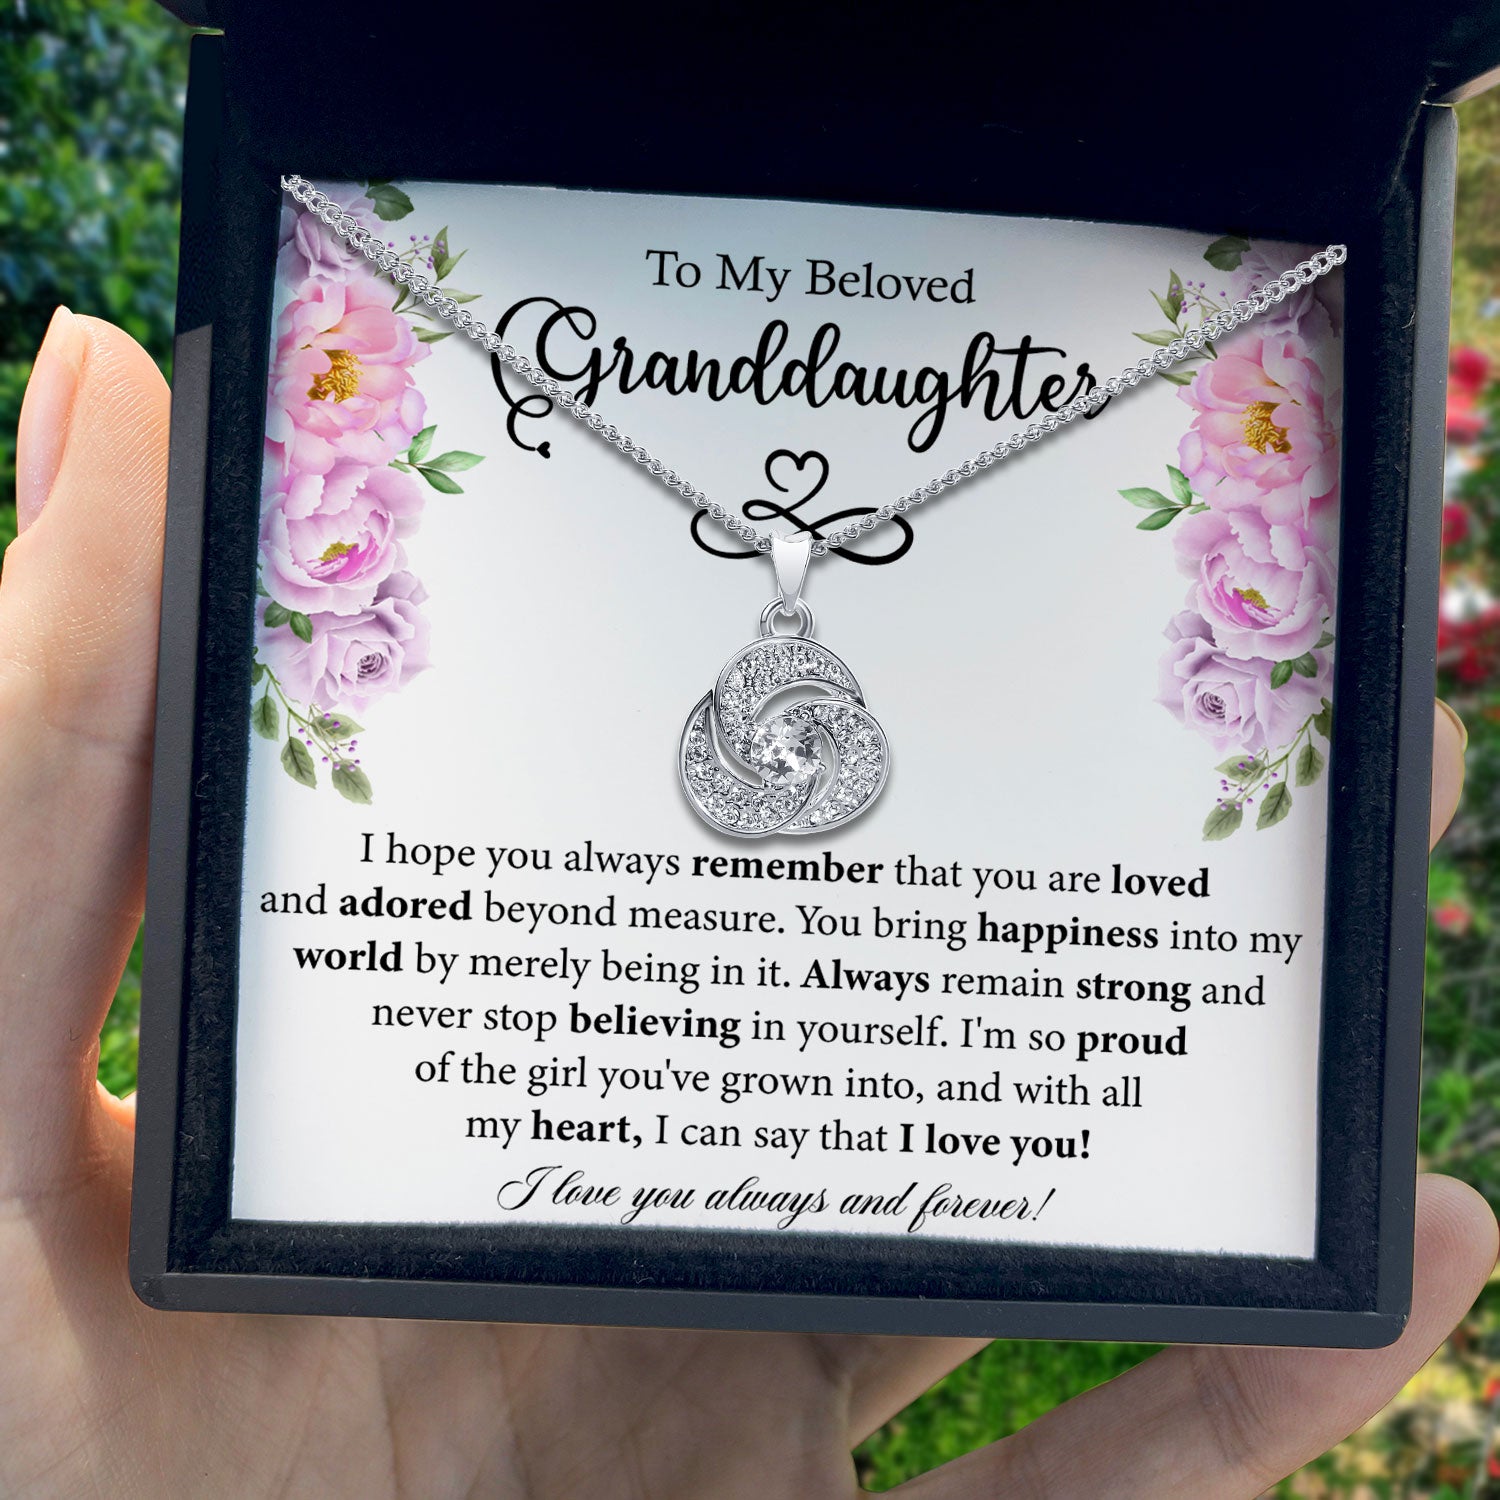 granddaughter gifts from grandma from grandpa granddaughter necklace g –  OC9 Gifts